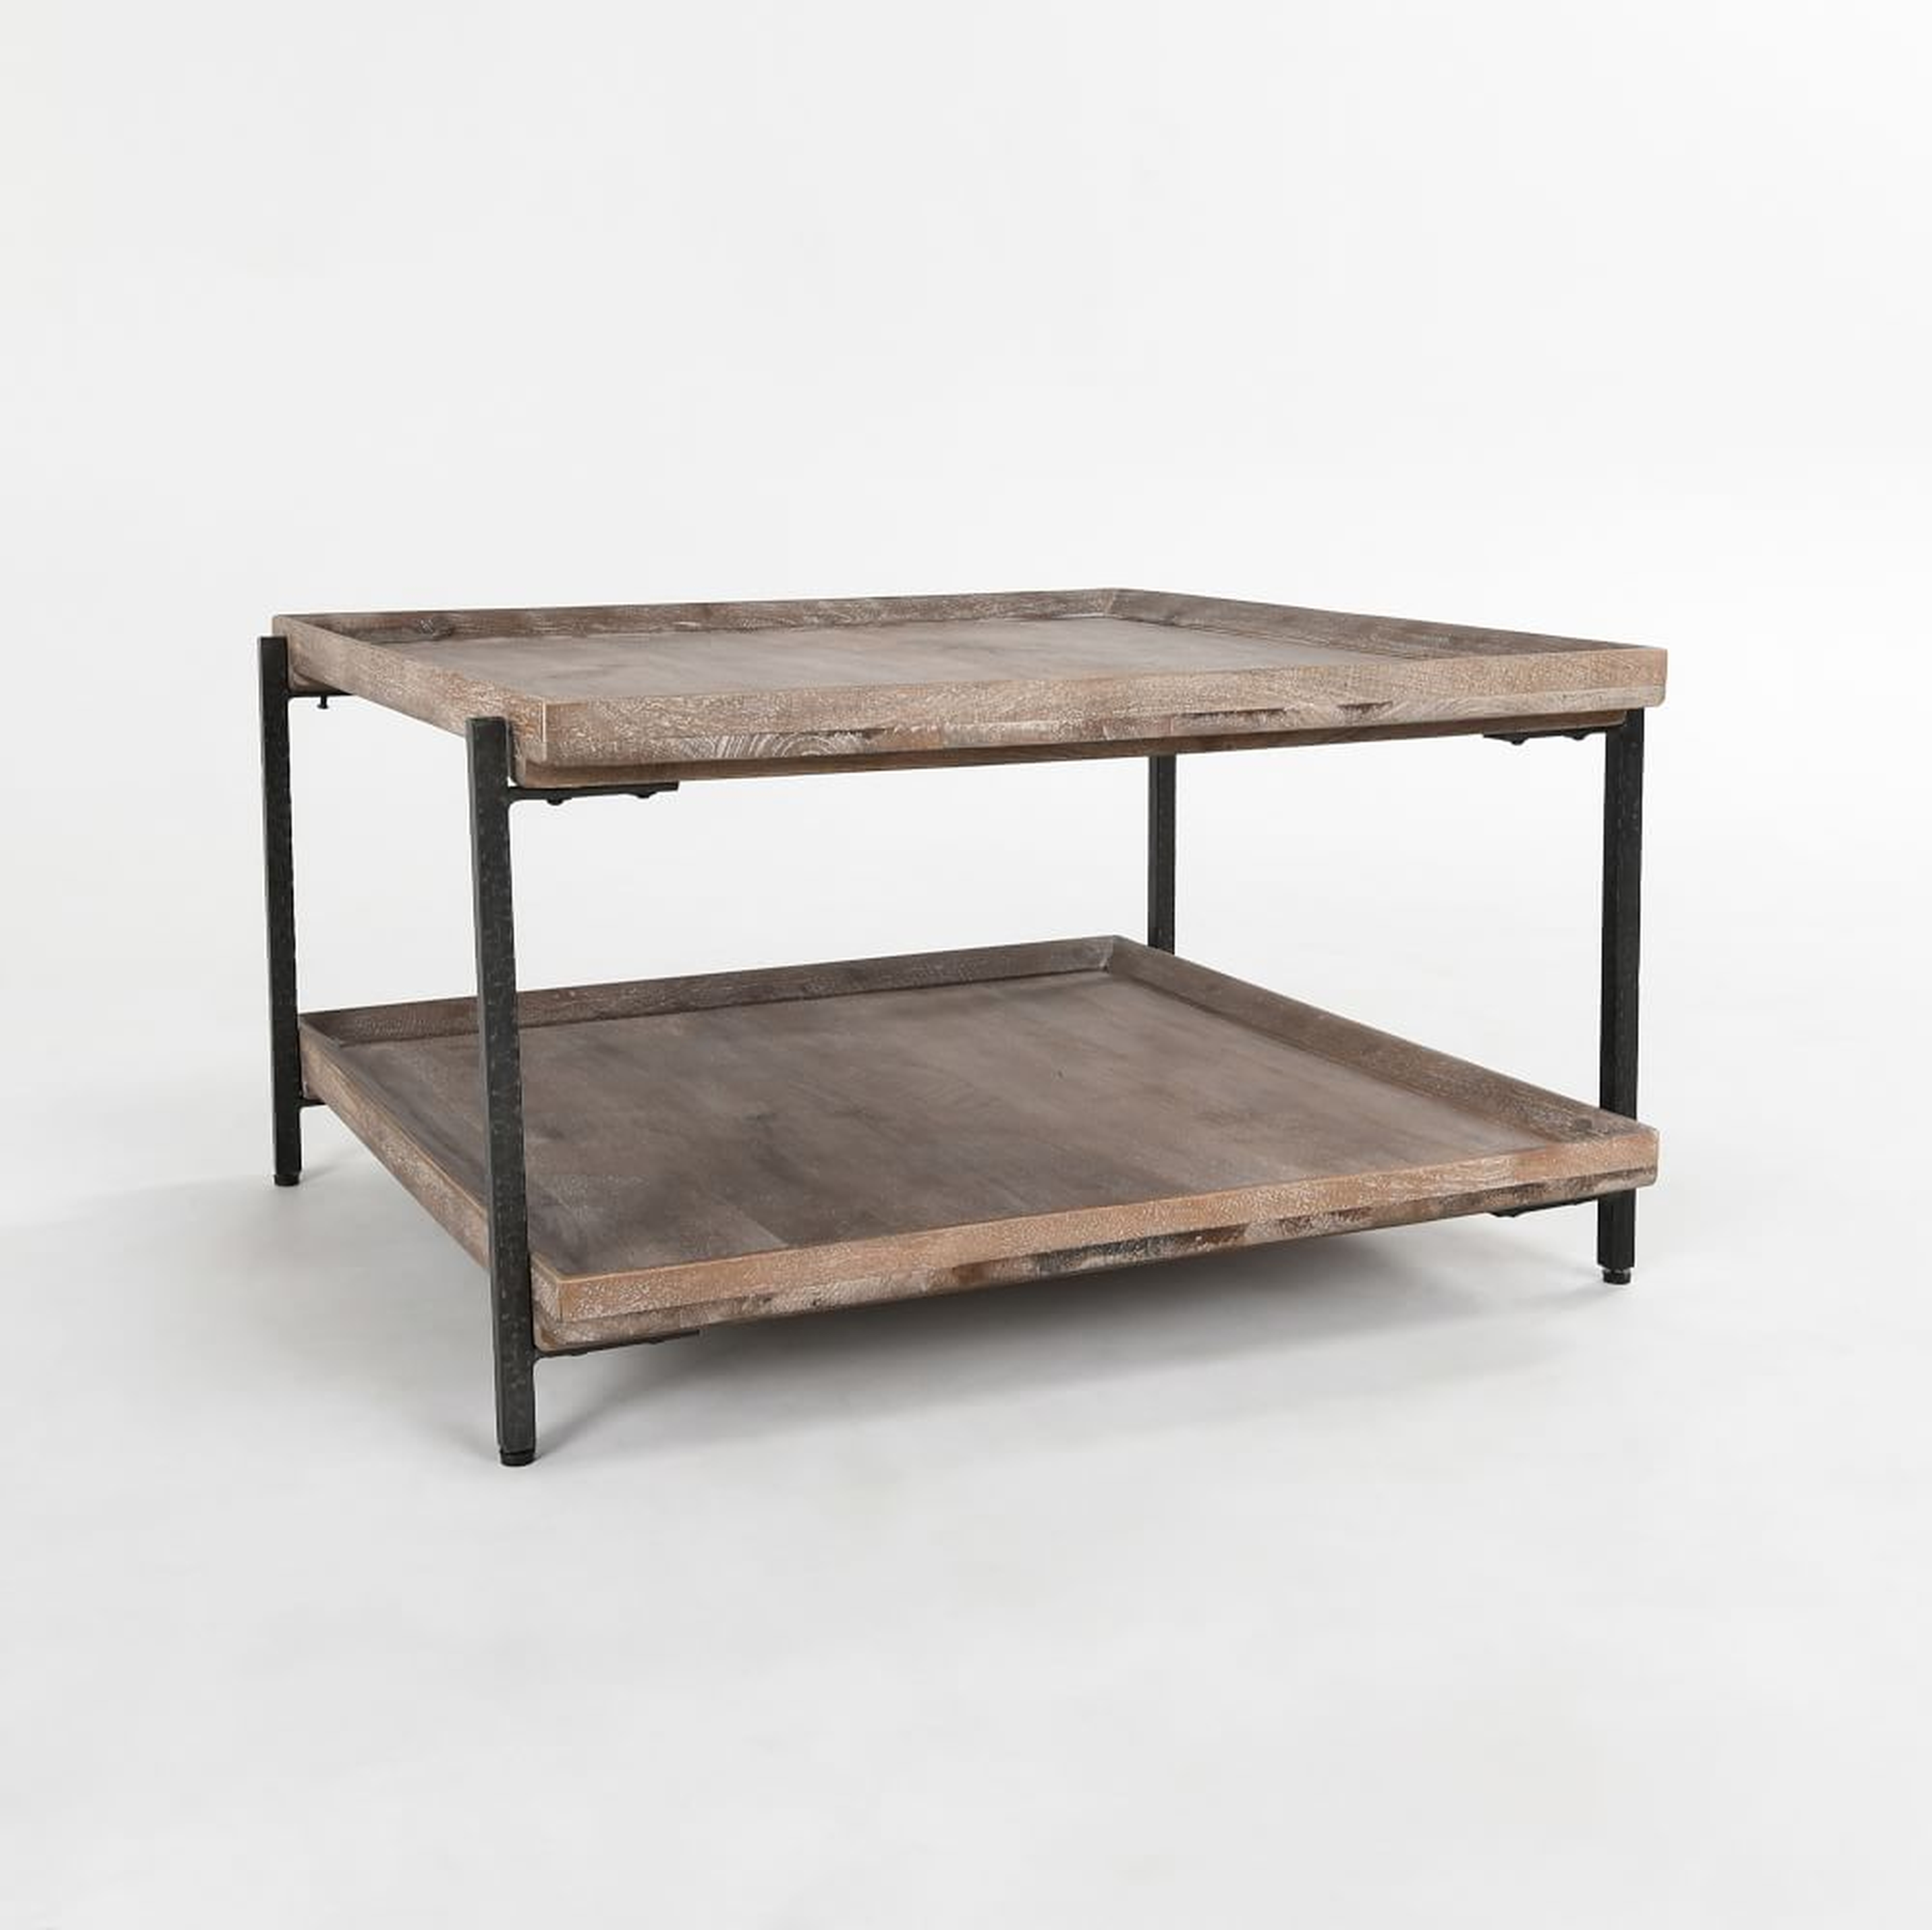 Two Tray Coffee Table - West Elm